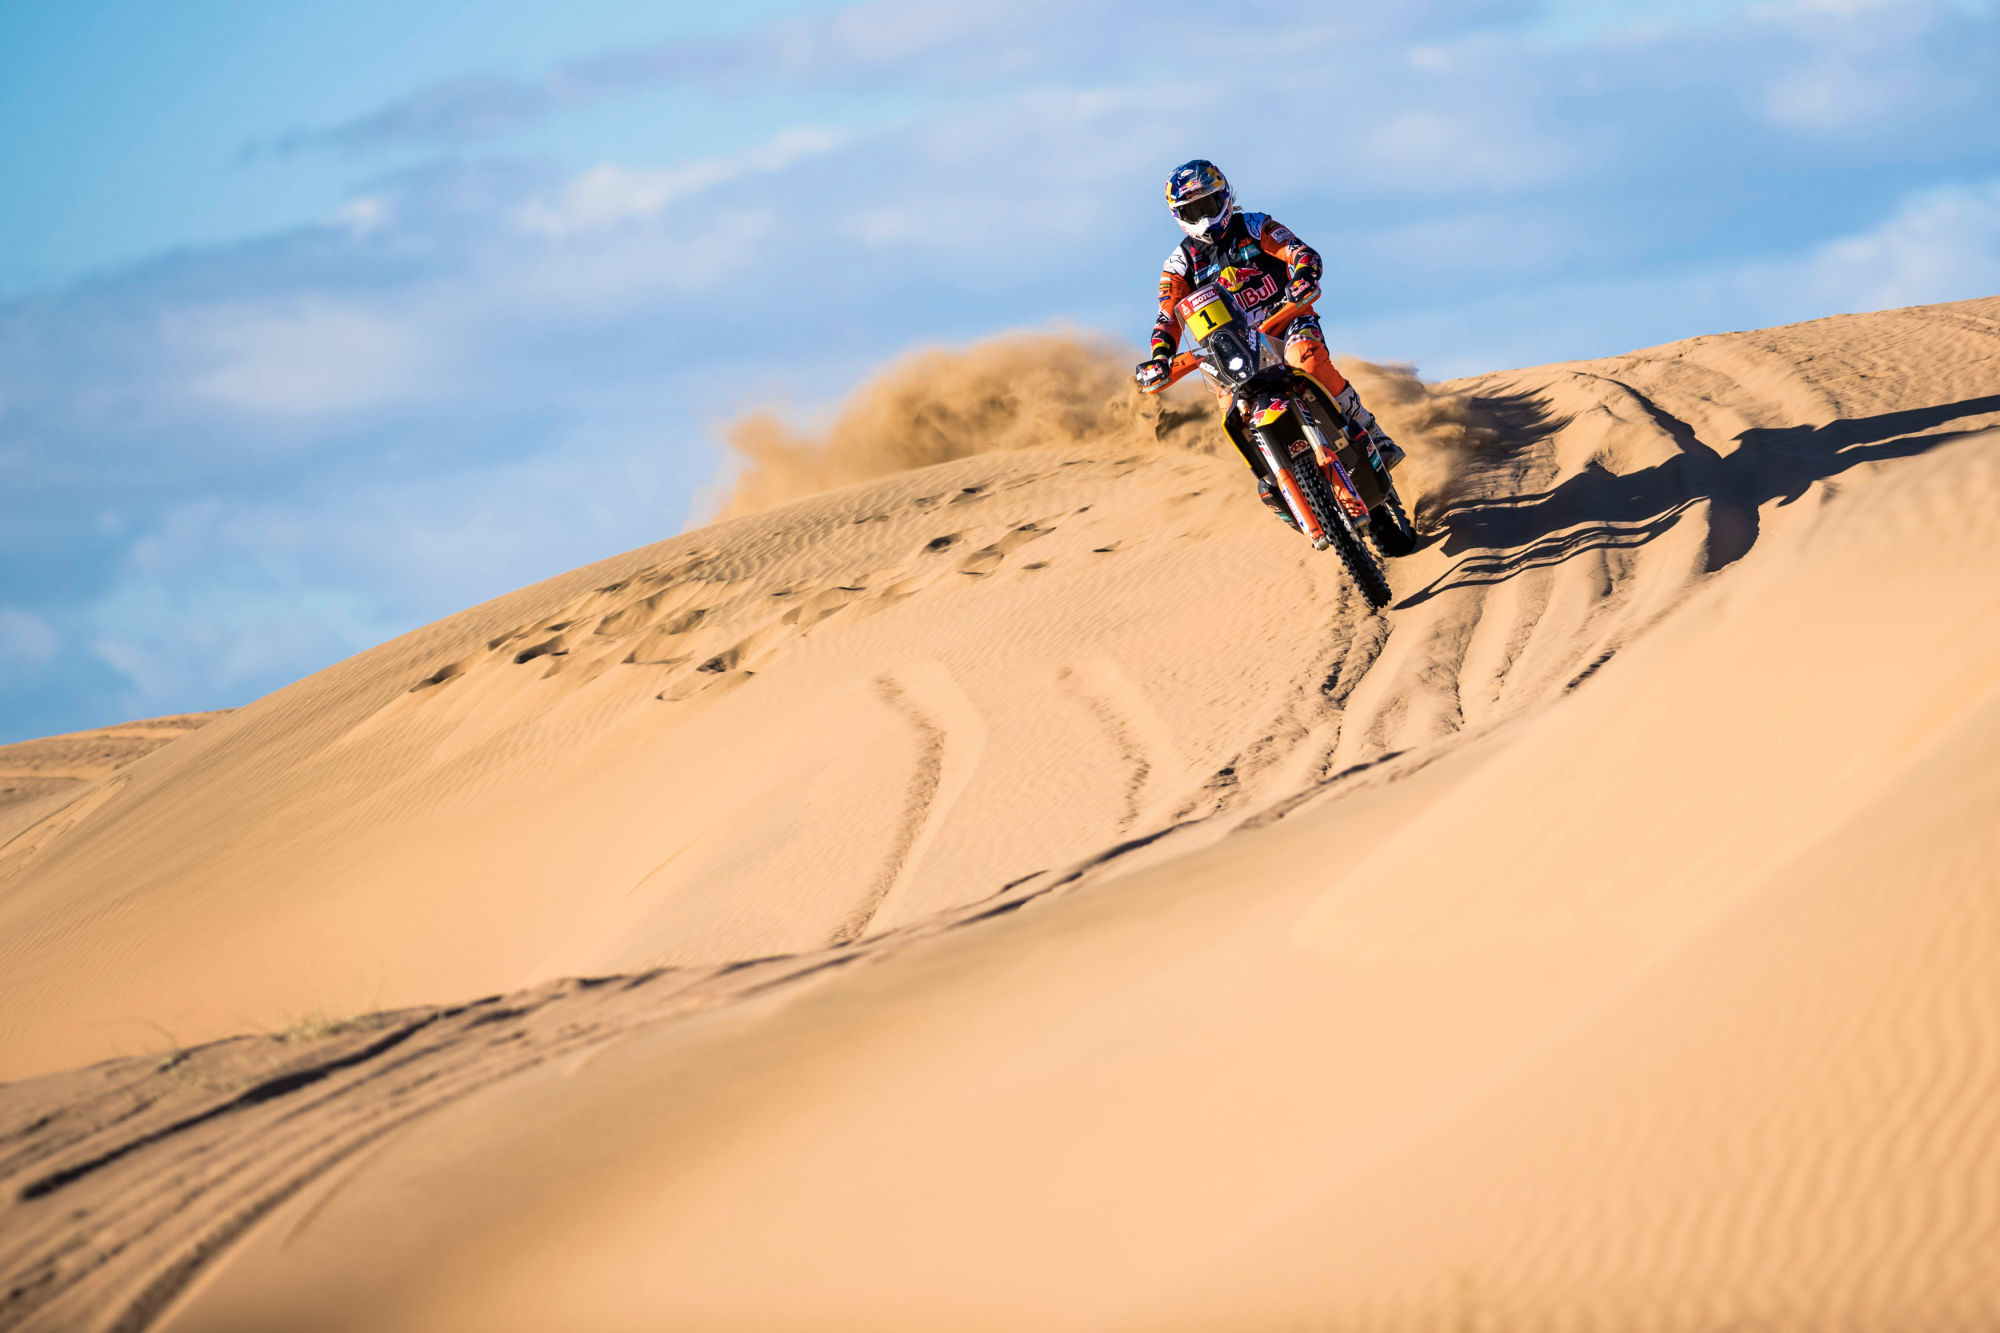 AL WAJH,SAUDI ARABIA,05.JAN.20 - MOTORSPORTS, RALLY - Rally Dakar 2020, stage 1, Jeddah - Al Wajh. Image shows Toby Price (AUS/ KTM). Photo: GEPA pictures/ Red Bull Content Pool/ Marcelo Maragni - ATTENTION - FREE OF CHARGE FOR EDITORIAL USE 

Photo by Icon Sport -  (Arabie Saoudite )